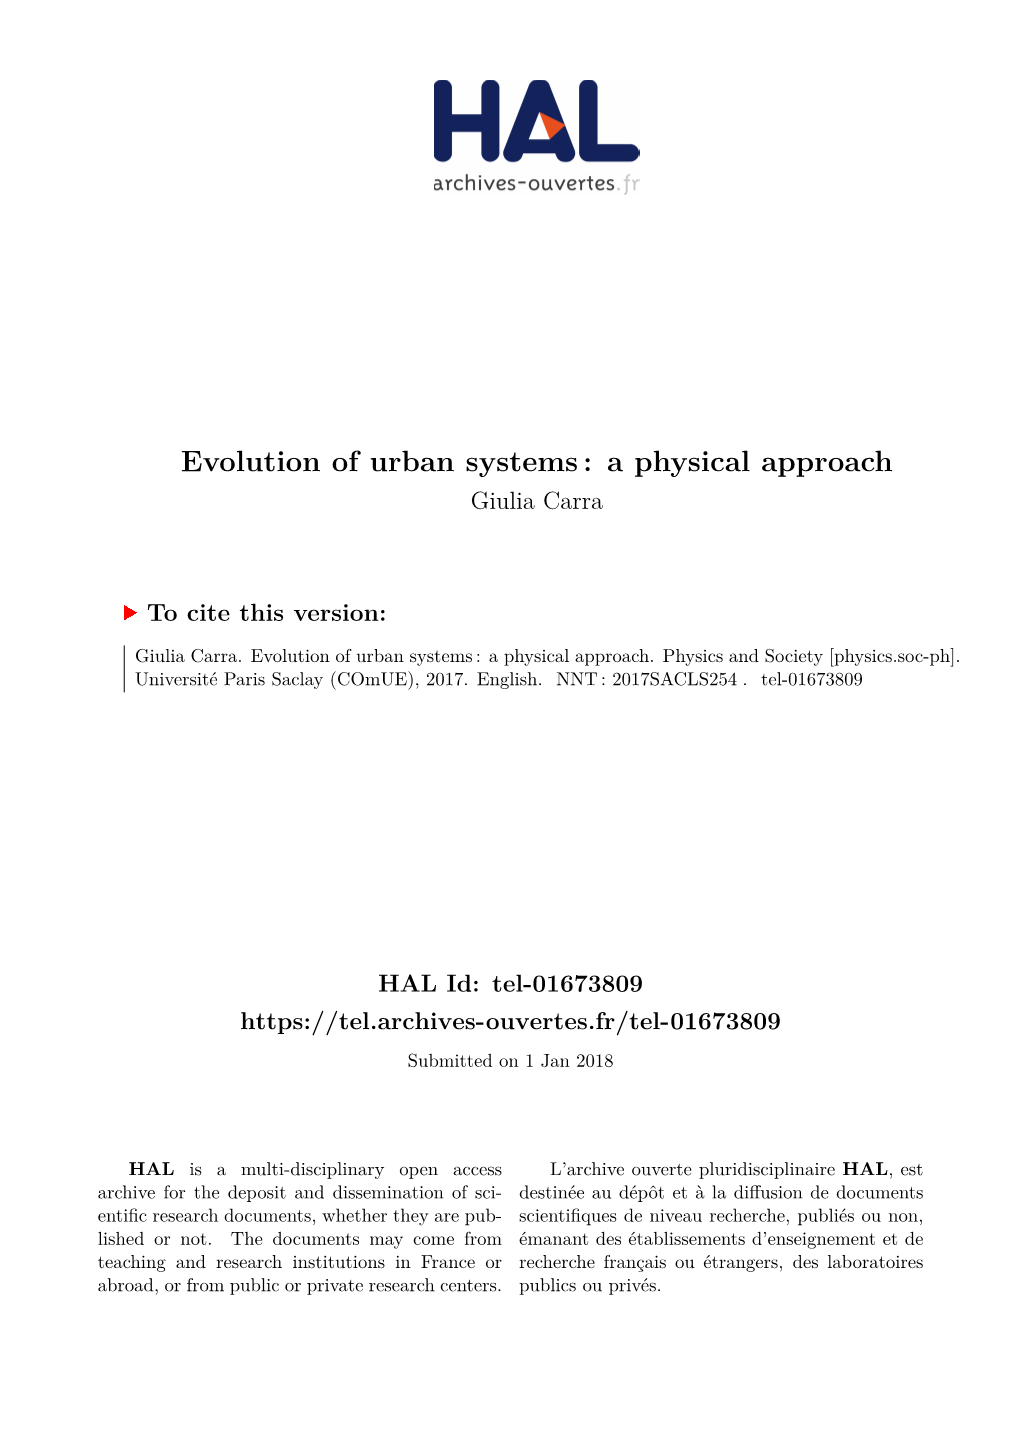 Evolution of Urban Systems: a Physical Approach